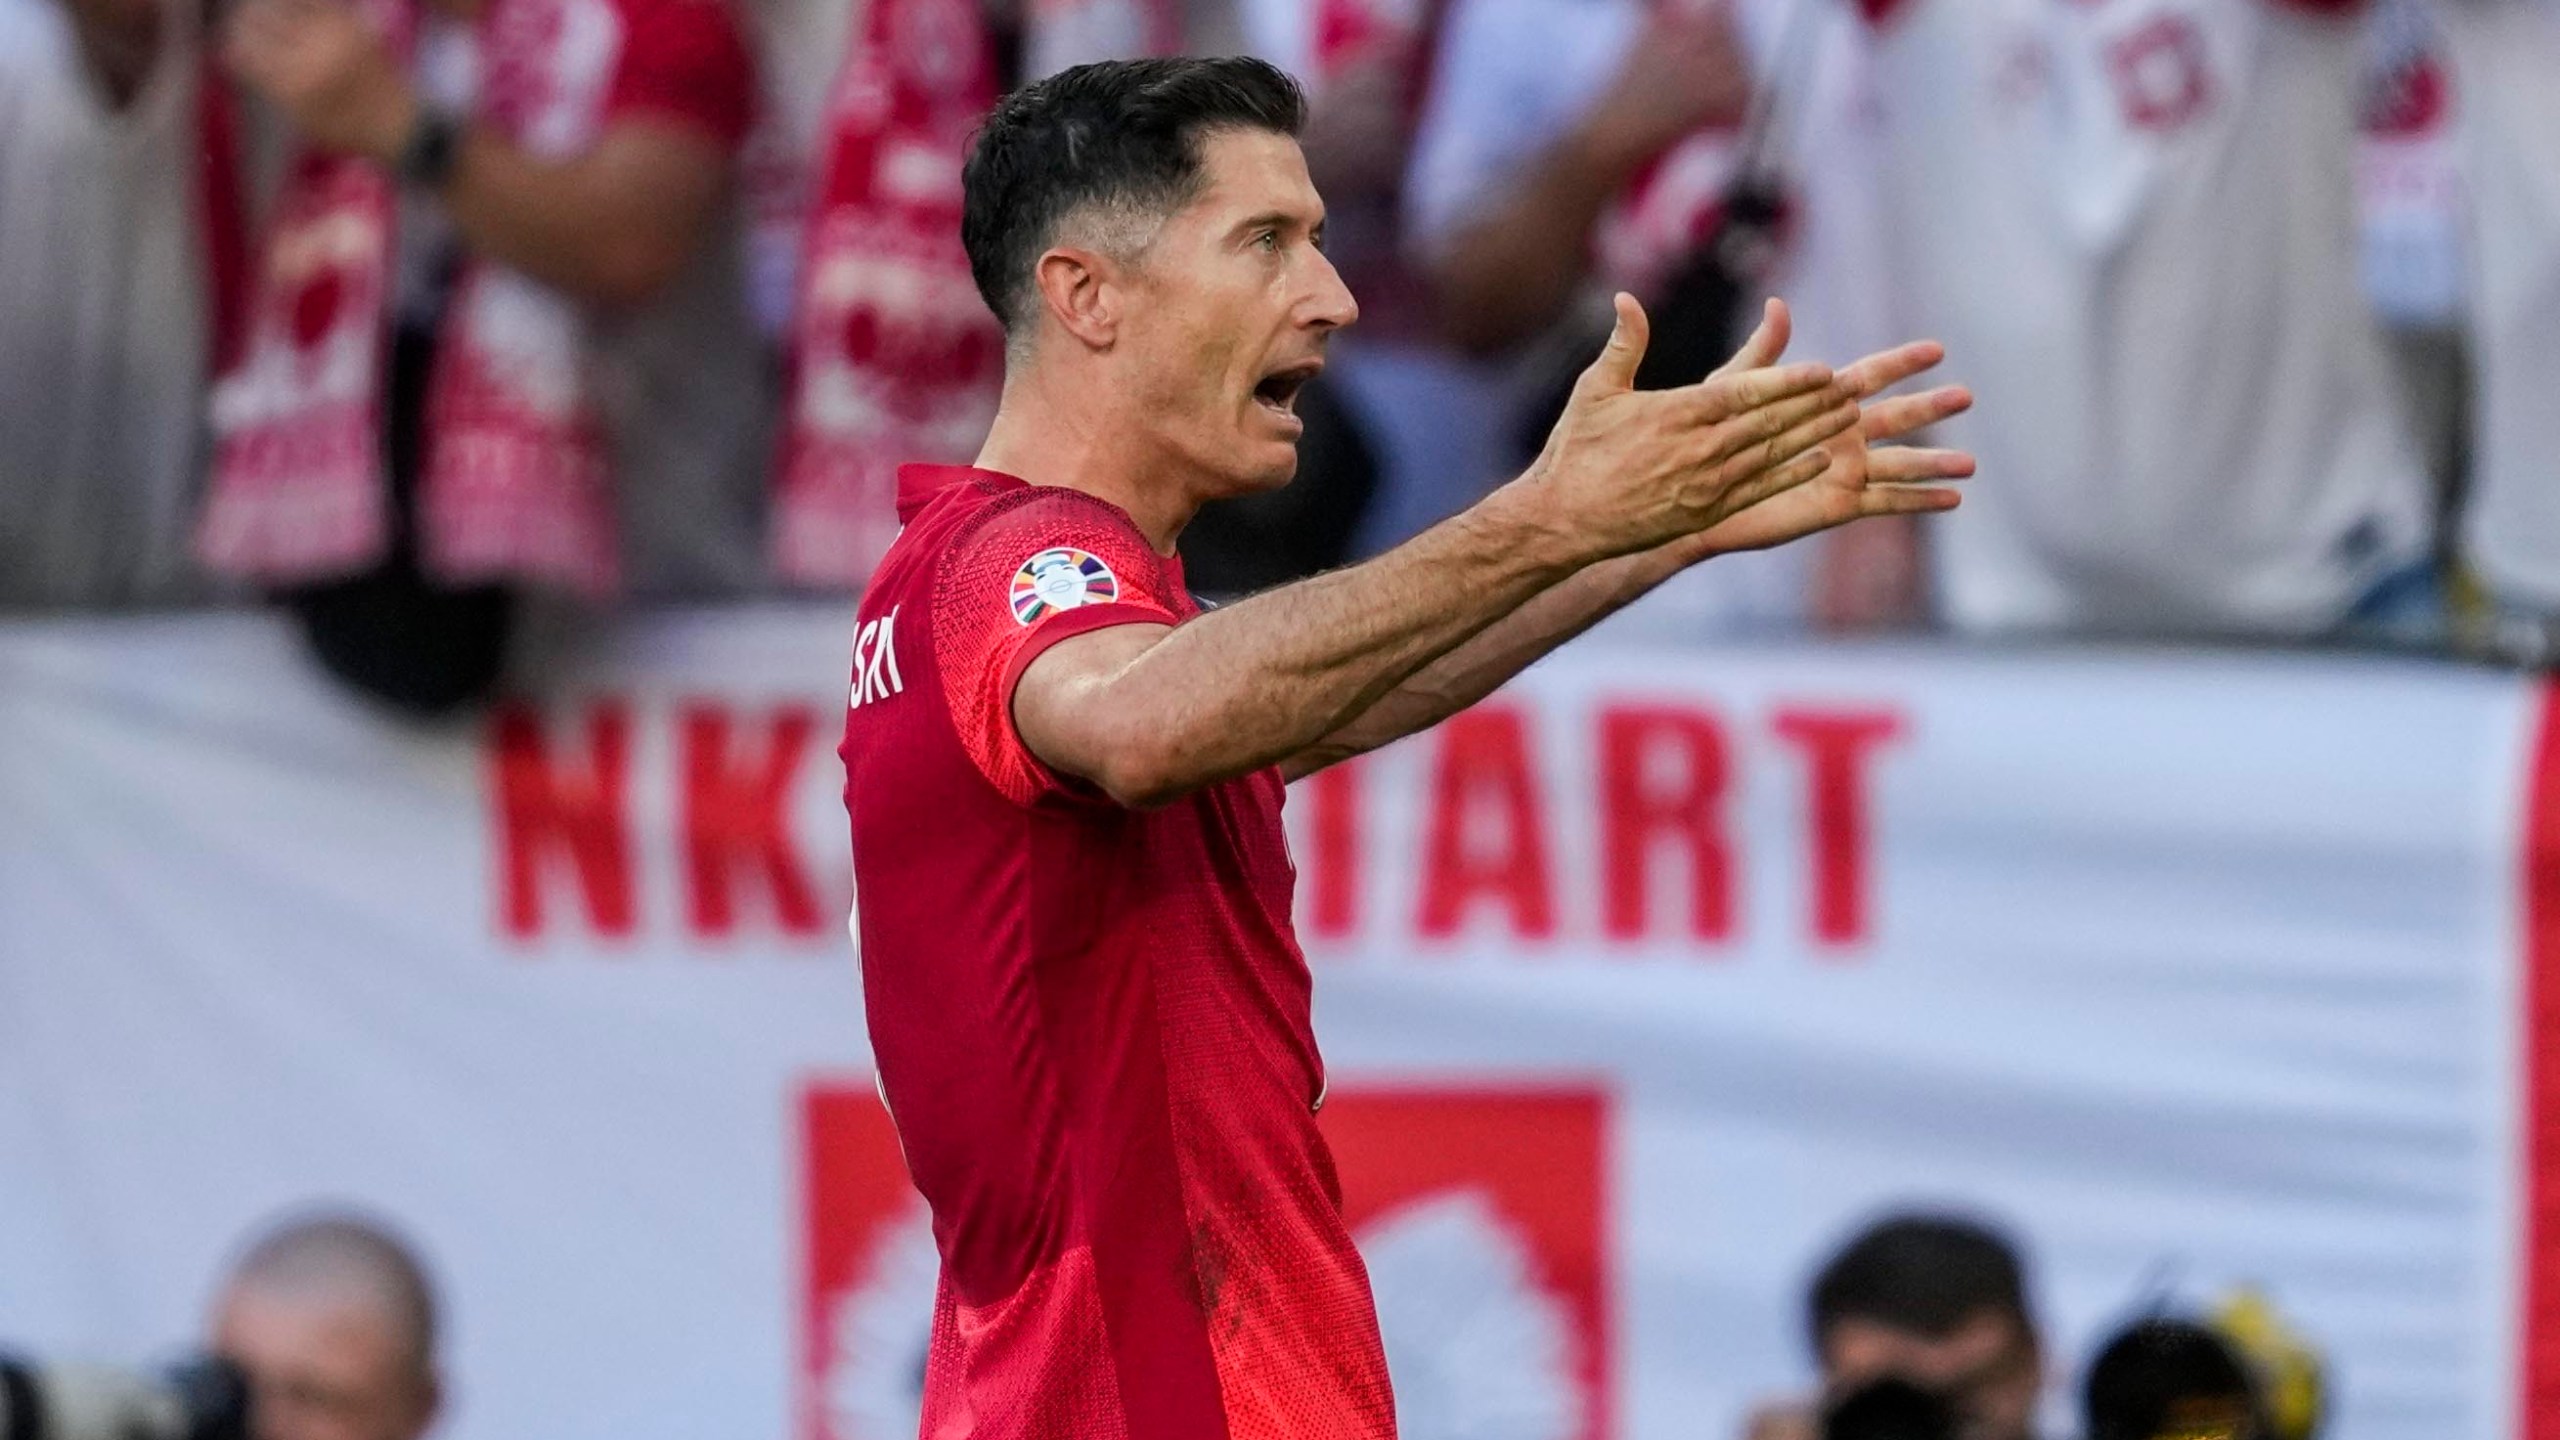 Poland's Robert Lewandowski celebrates after scoring a penalty kick during a Group D match between the France and Poland at the Euro 2024 soccer tournament in Dortmund, Germany, Tuesday, June 25, 2024. (AP Photo/Darko Vojinovic)